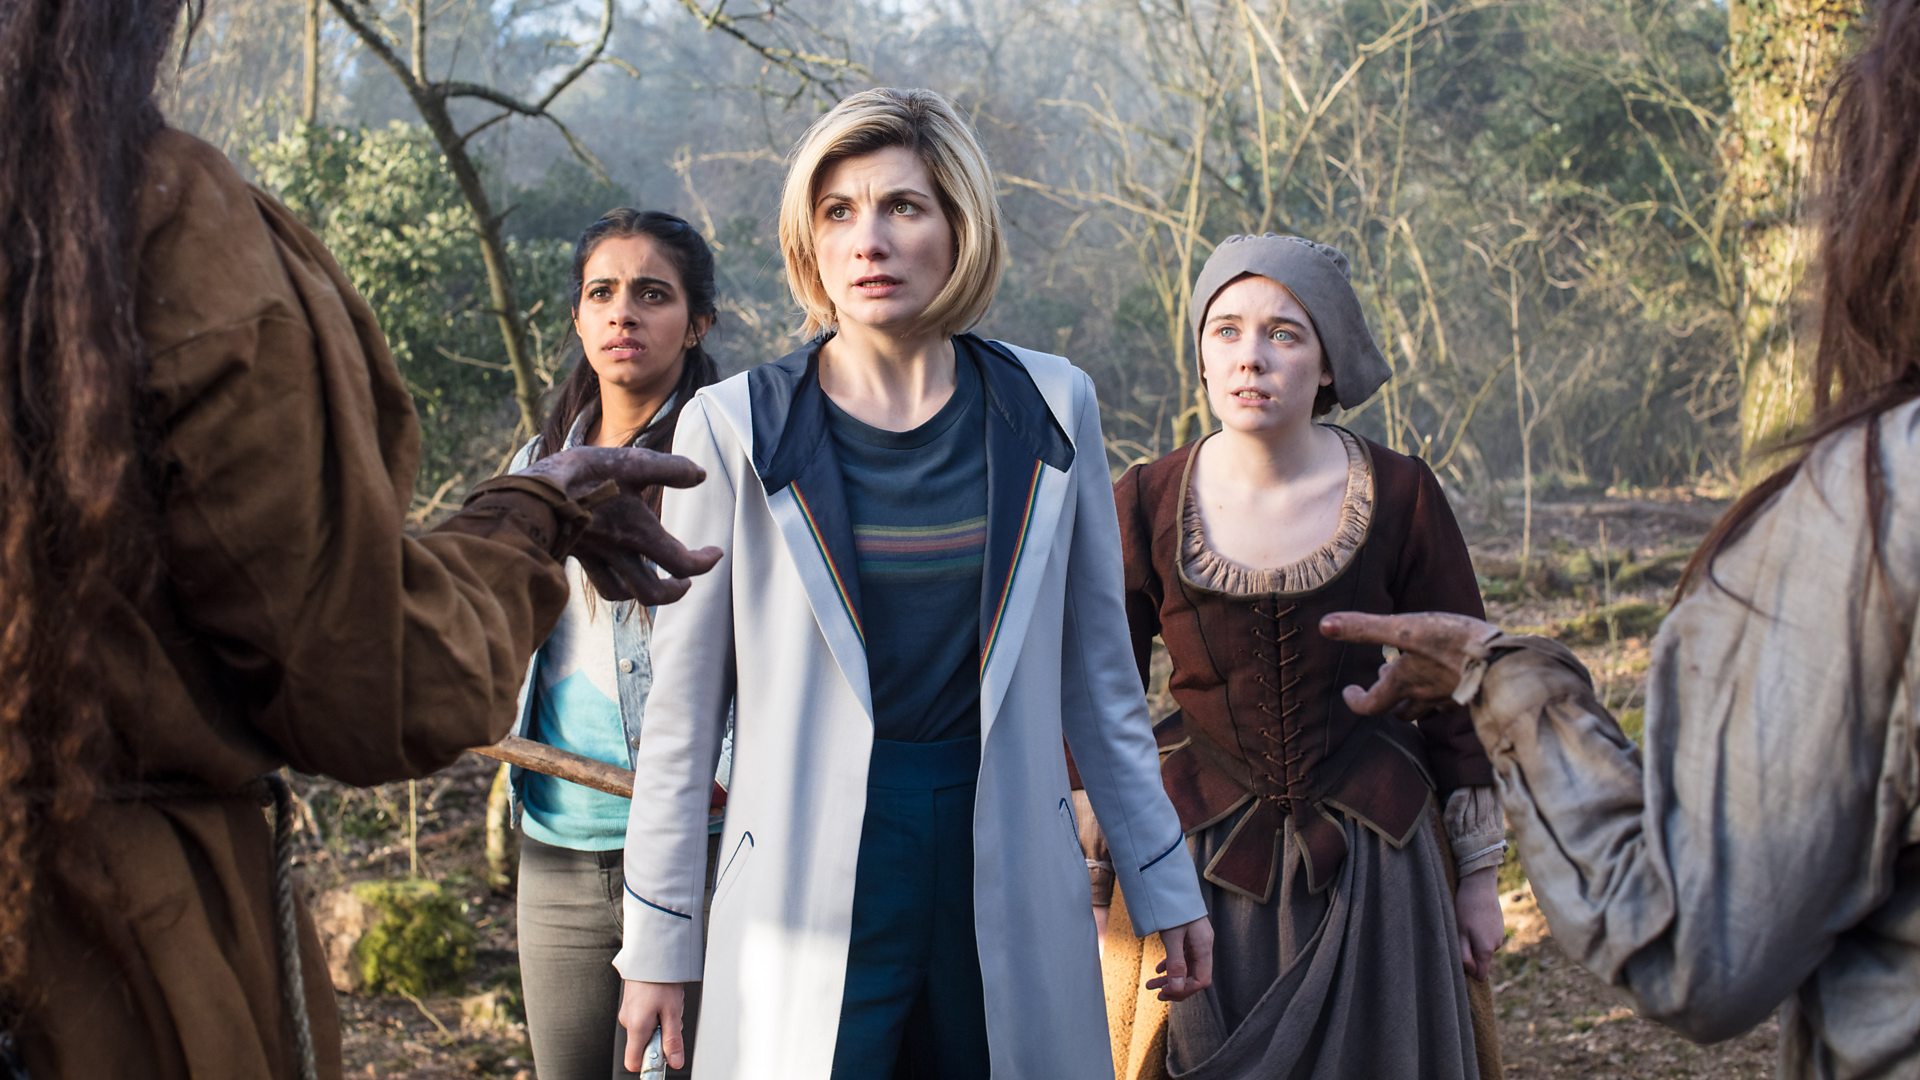 ‘Doctor Who’: 10 Things You May Not Know About ‘The Witchfinders’